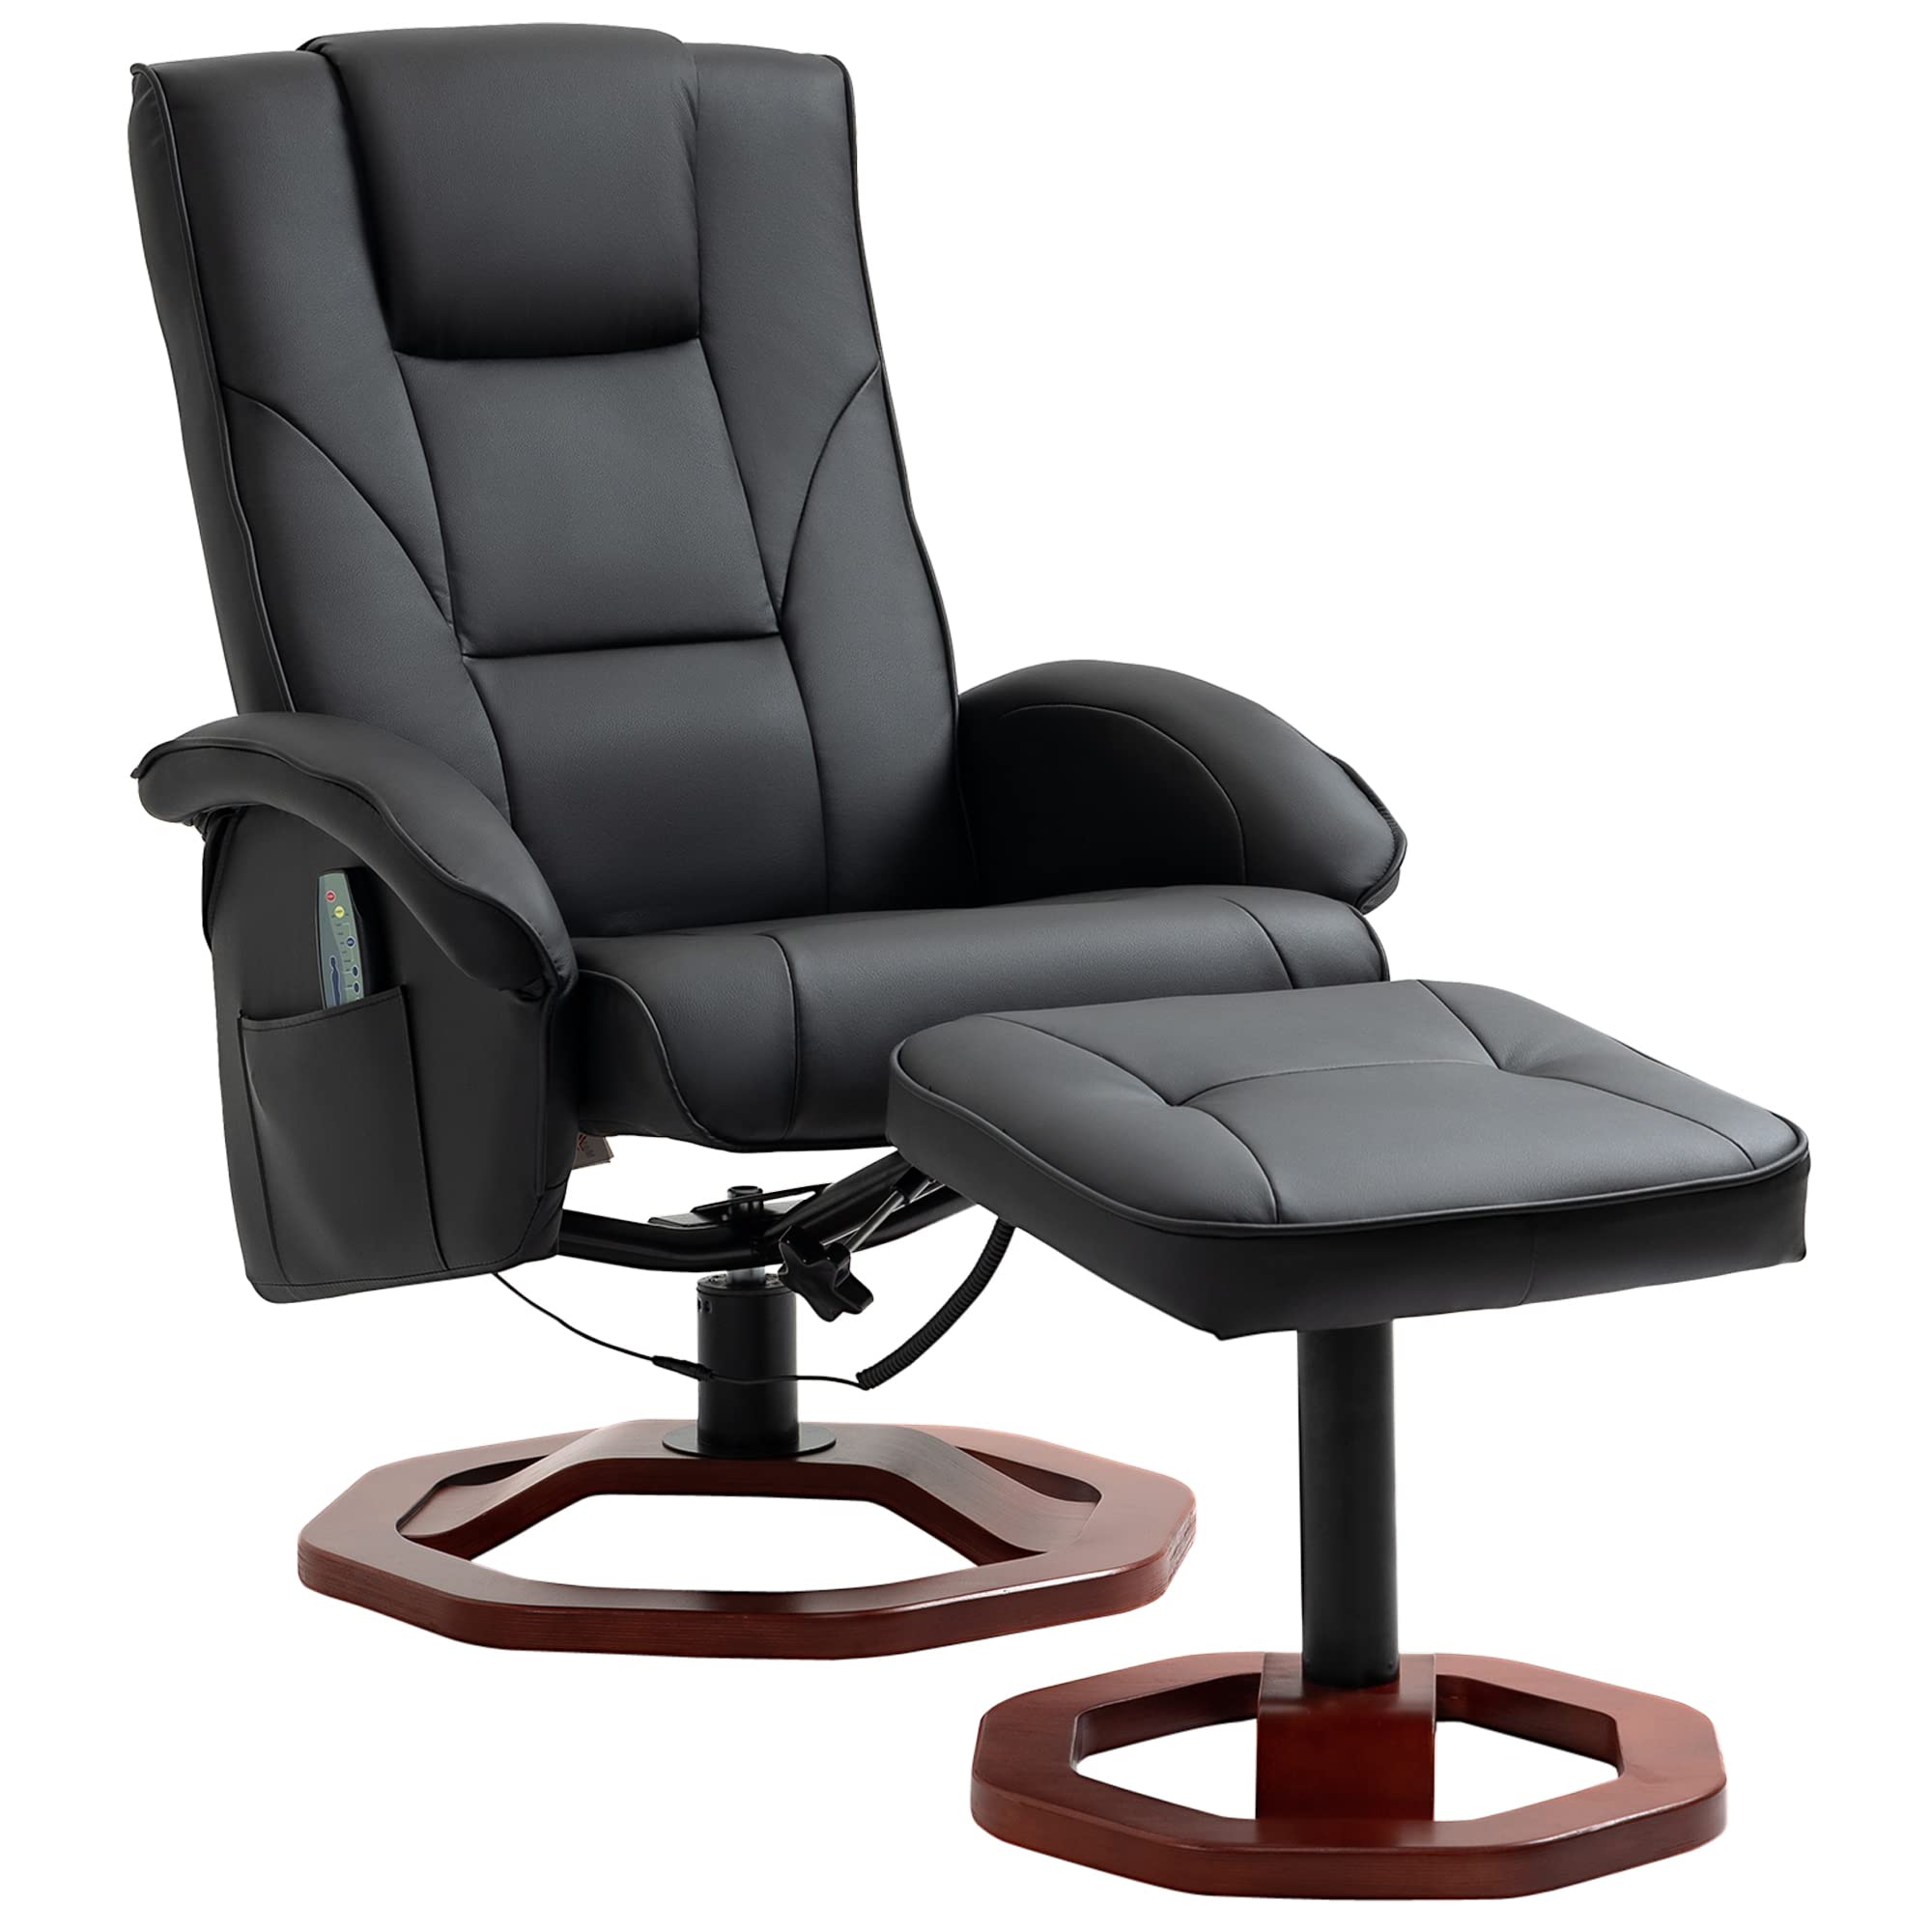 HOMCOM Massage Recliner Chair with Ottoman, Electric Faux Leather Recliner with 10 Vibration Points and 5 Massage Mode, Swivel R